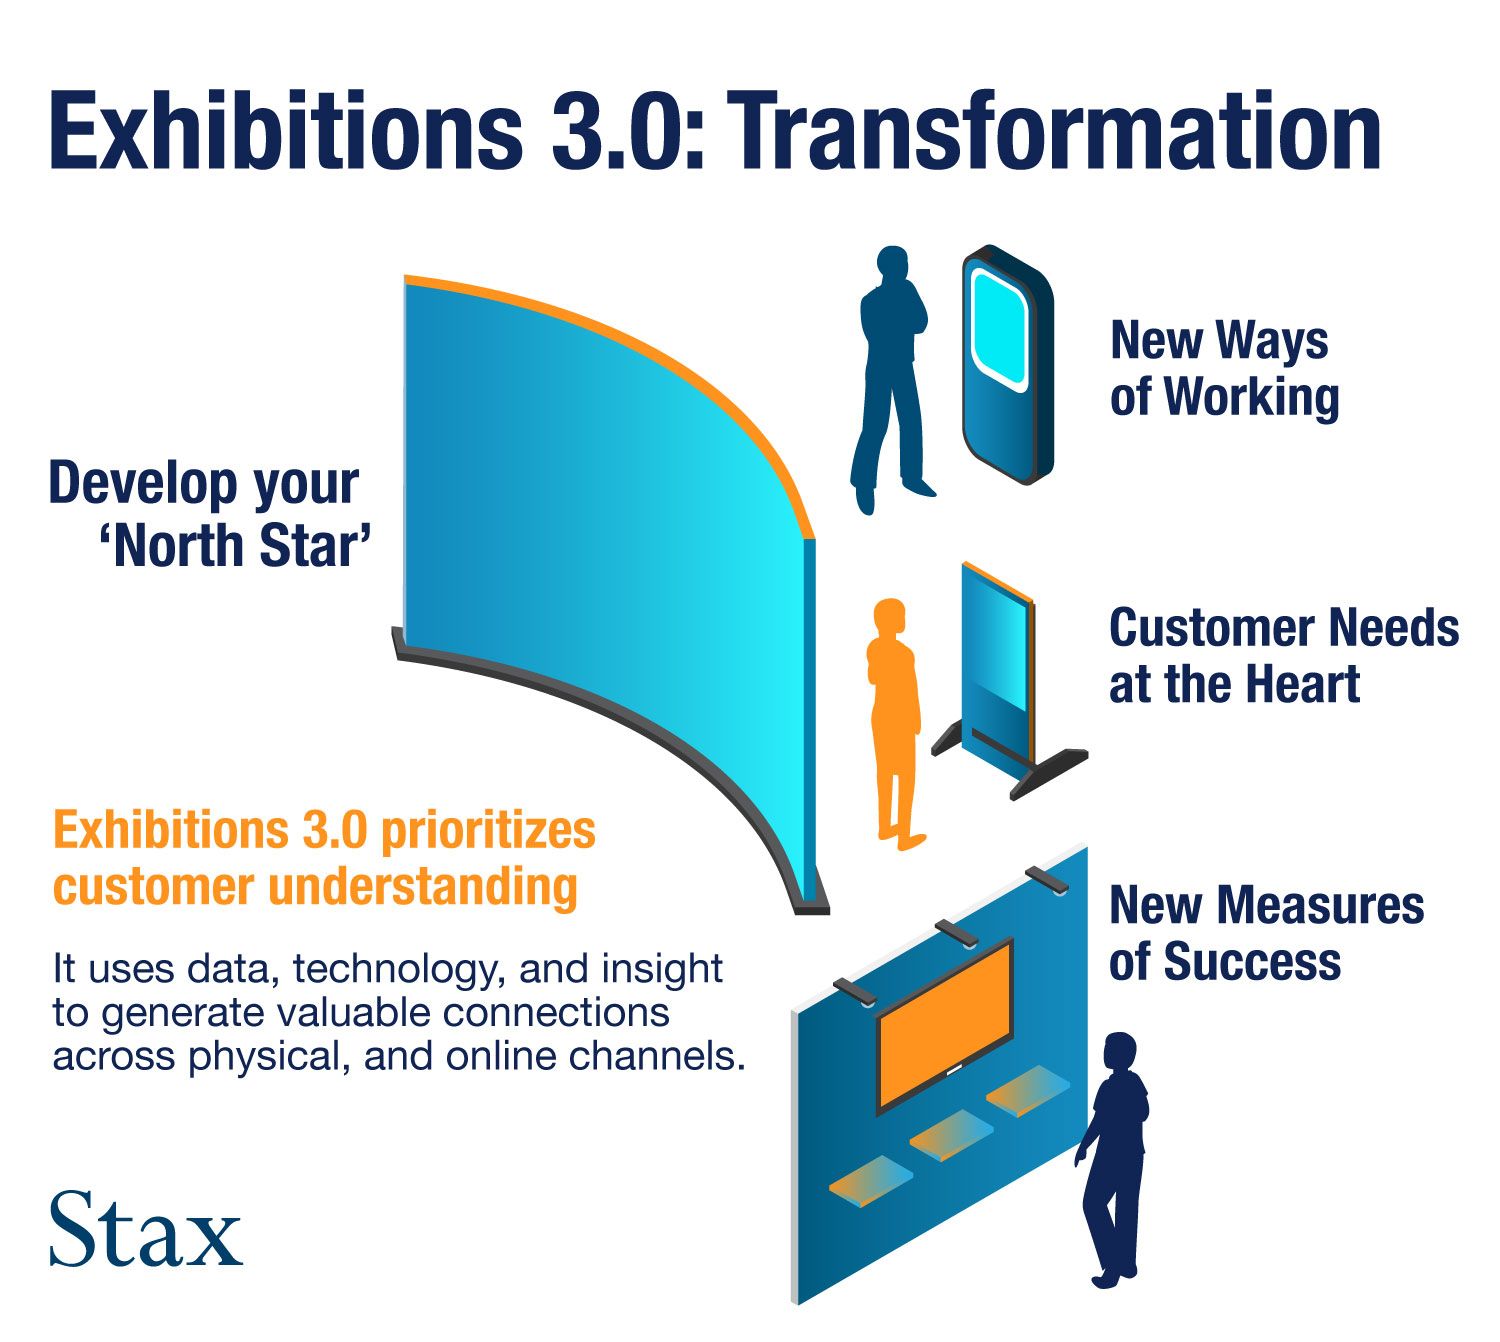 Exhibitions 3.0: Transformation. This framework prioritizes customer understanding by using less data, technology, and insights to generate valuable connections across physical, and online channels.